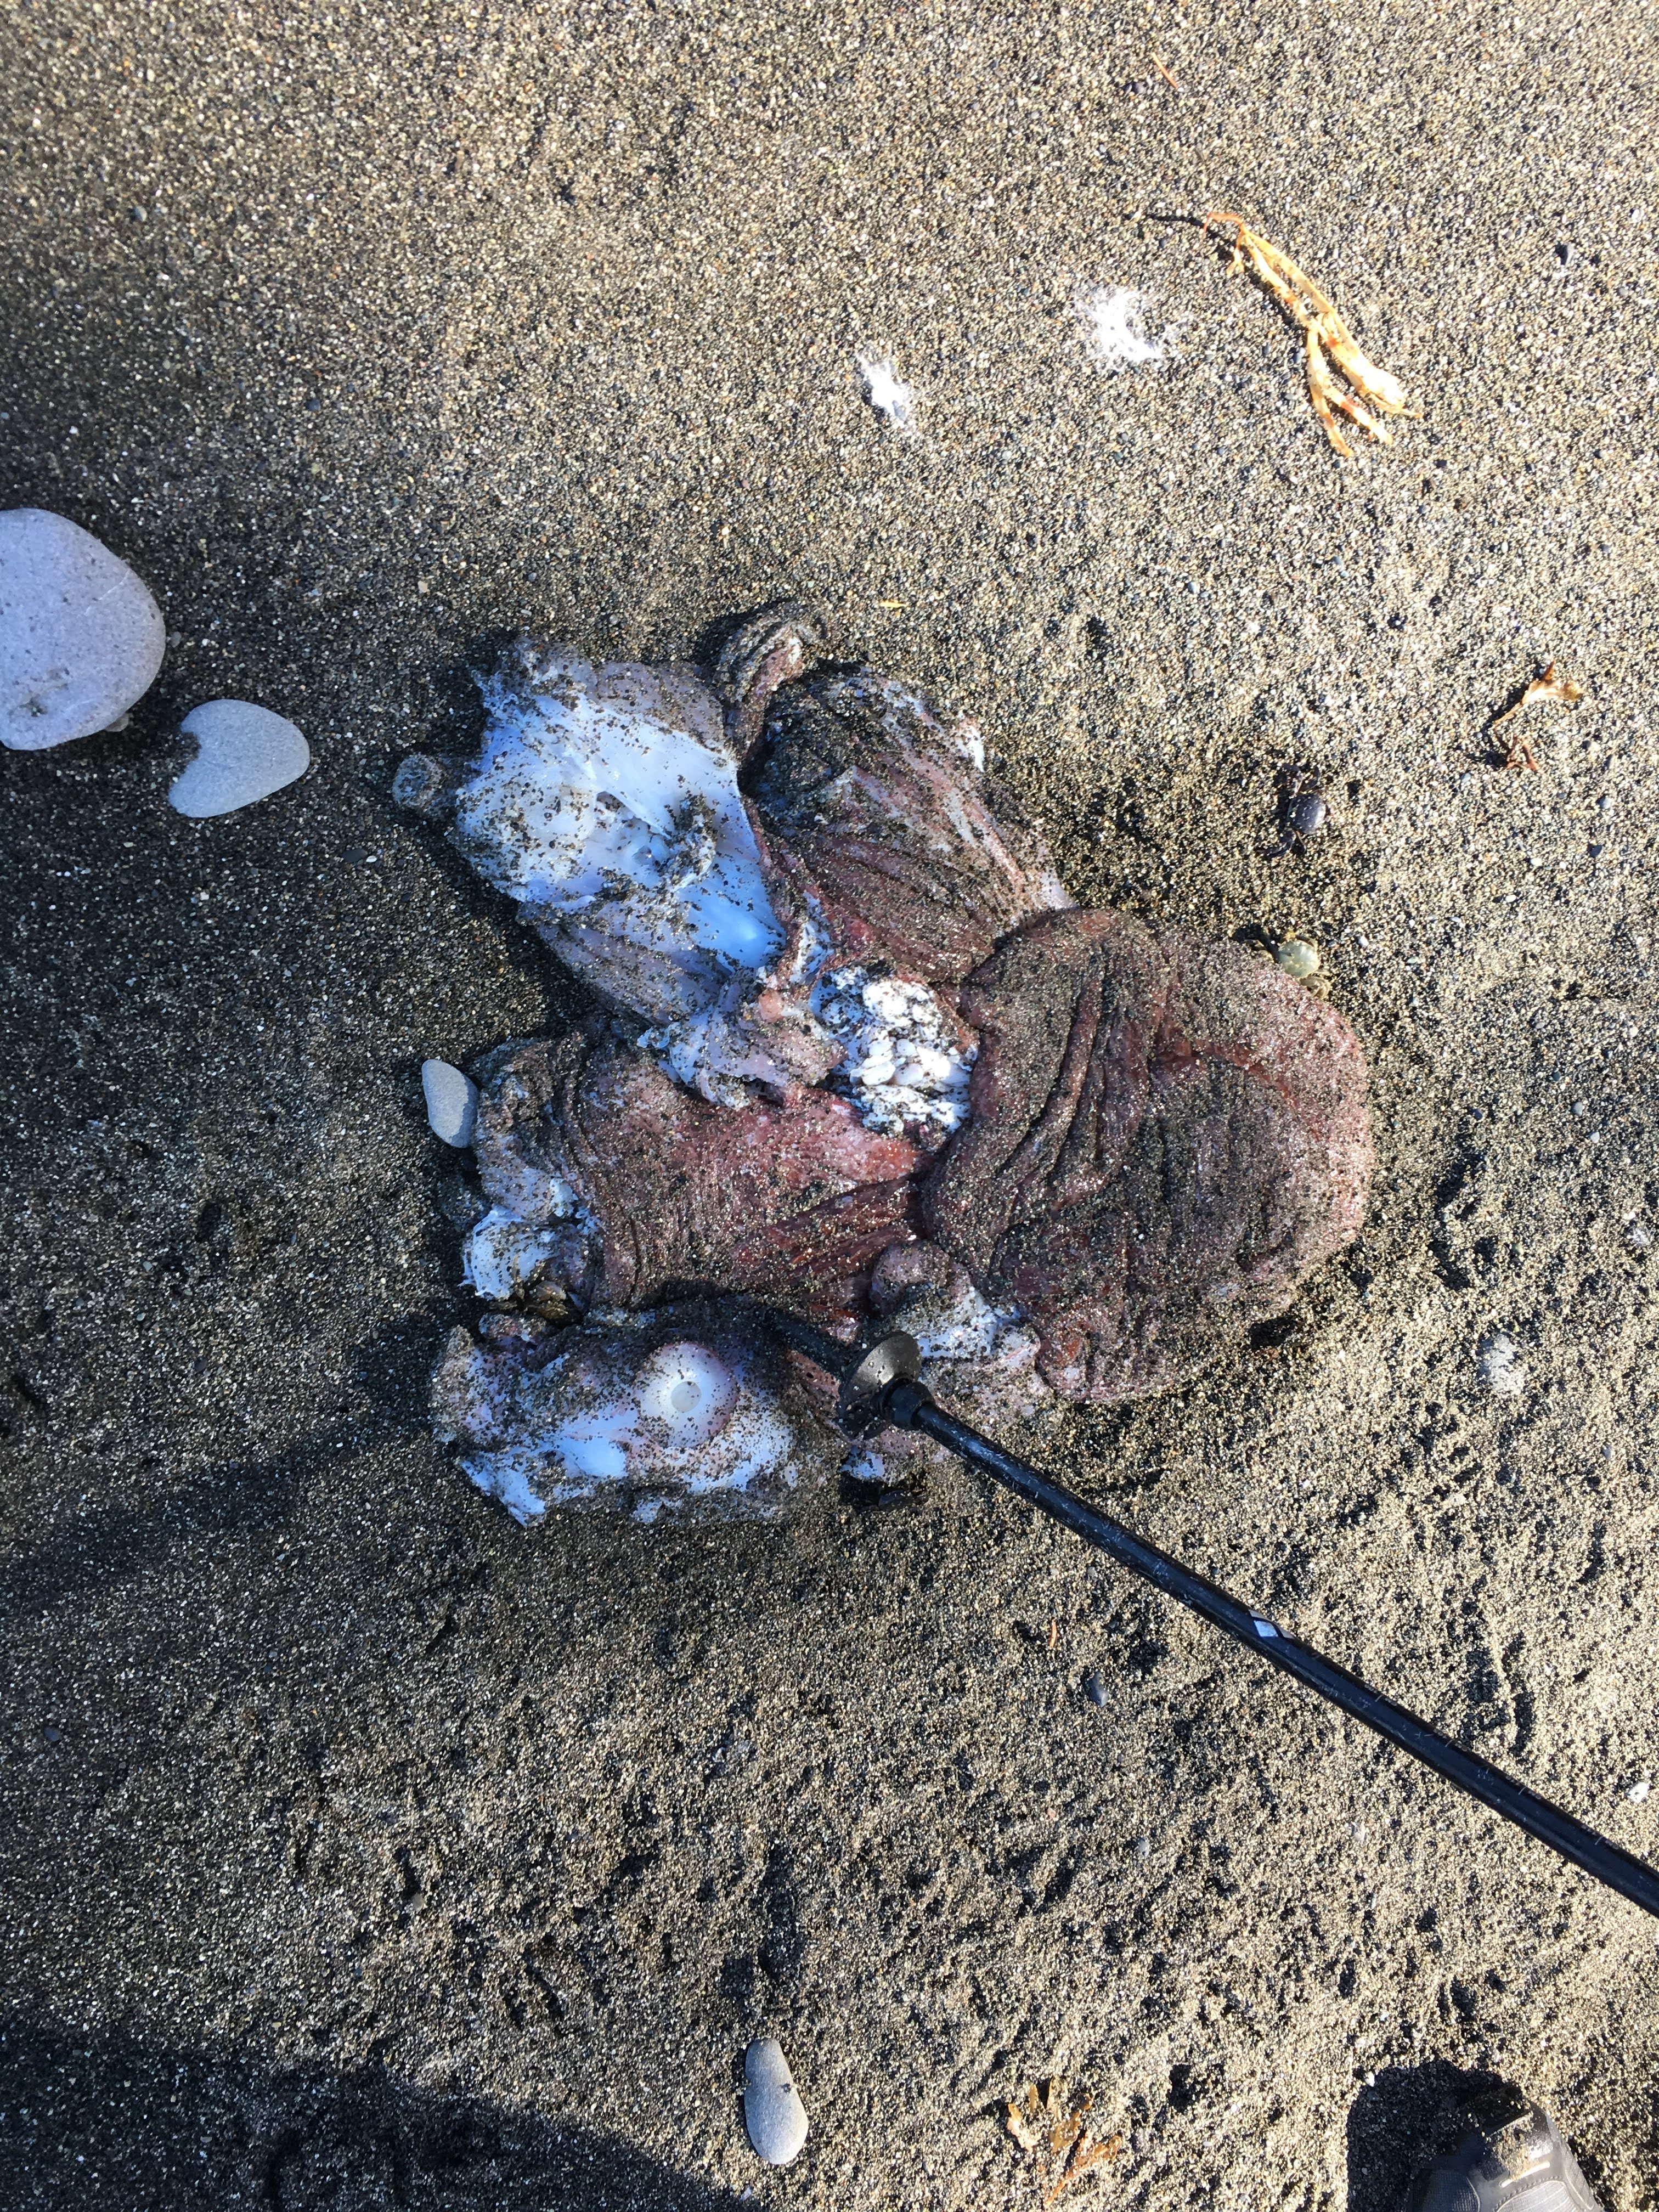 Did you know that this section of the coast is home to the world's largest octopus species called the <a href='https://www.nationalgeographic.com/animals/invertebrates/g/giant-pacific-octopus/' target='_blank'>Giant Pacific Octopus</a>? We found this dead octopus washed up on the beach. Not sure if it's a Giant but it was pretty darn big.